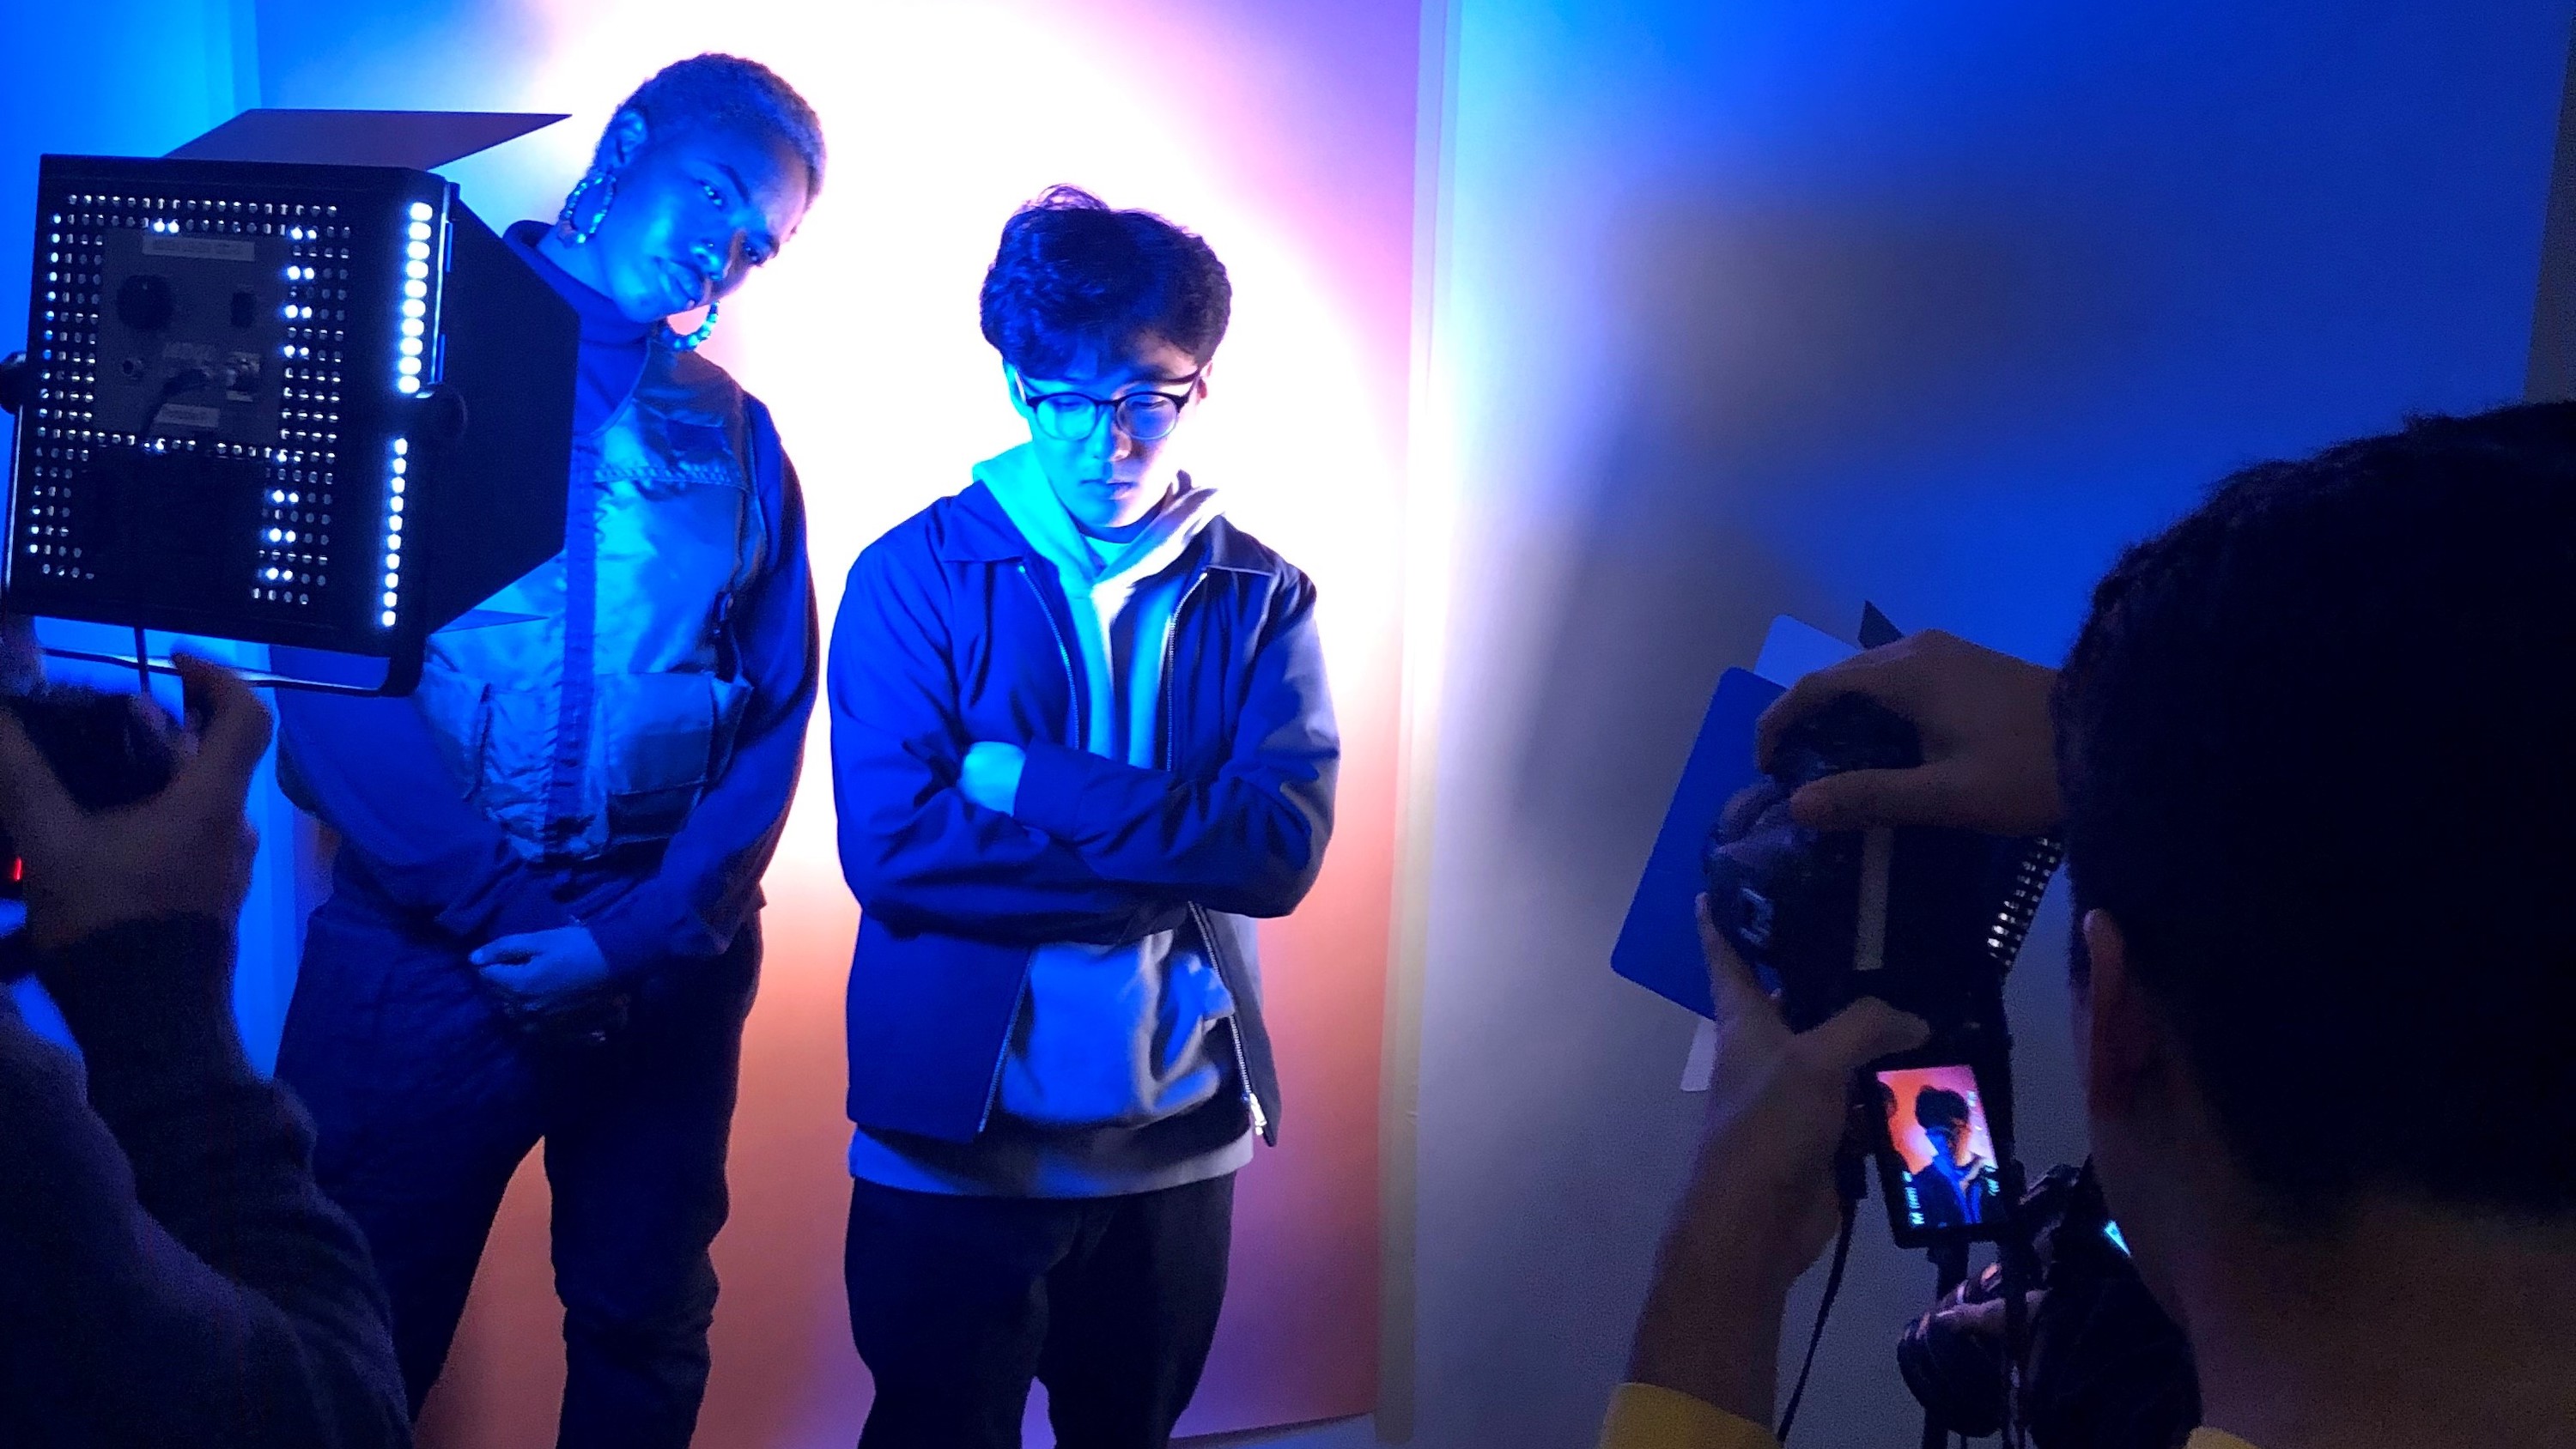 Two teens stand in a serious pose with bright white and blue lights on them while  someone off the frame takes a photo of them